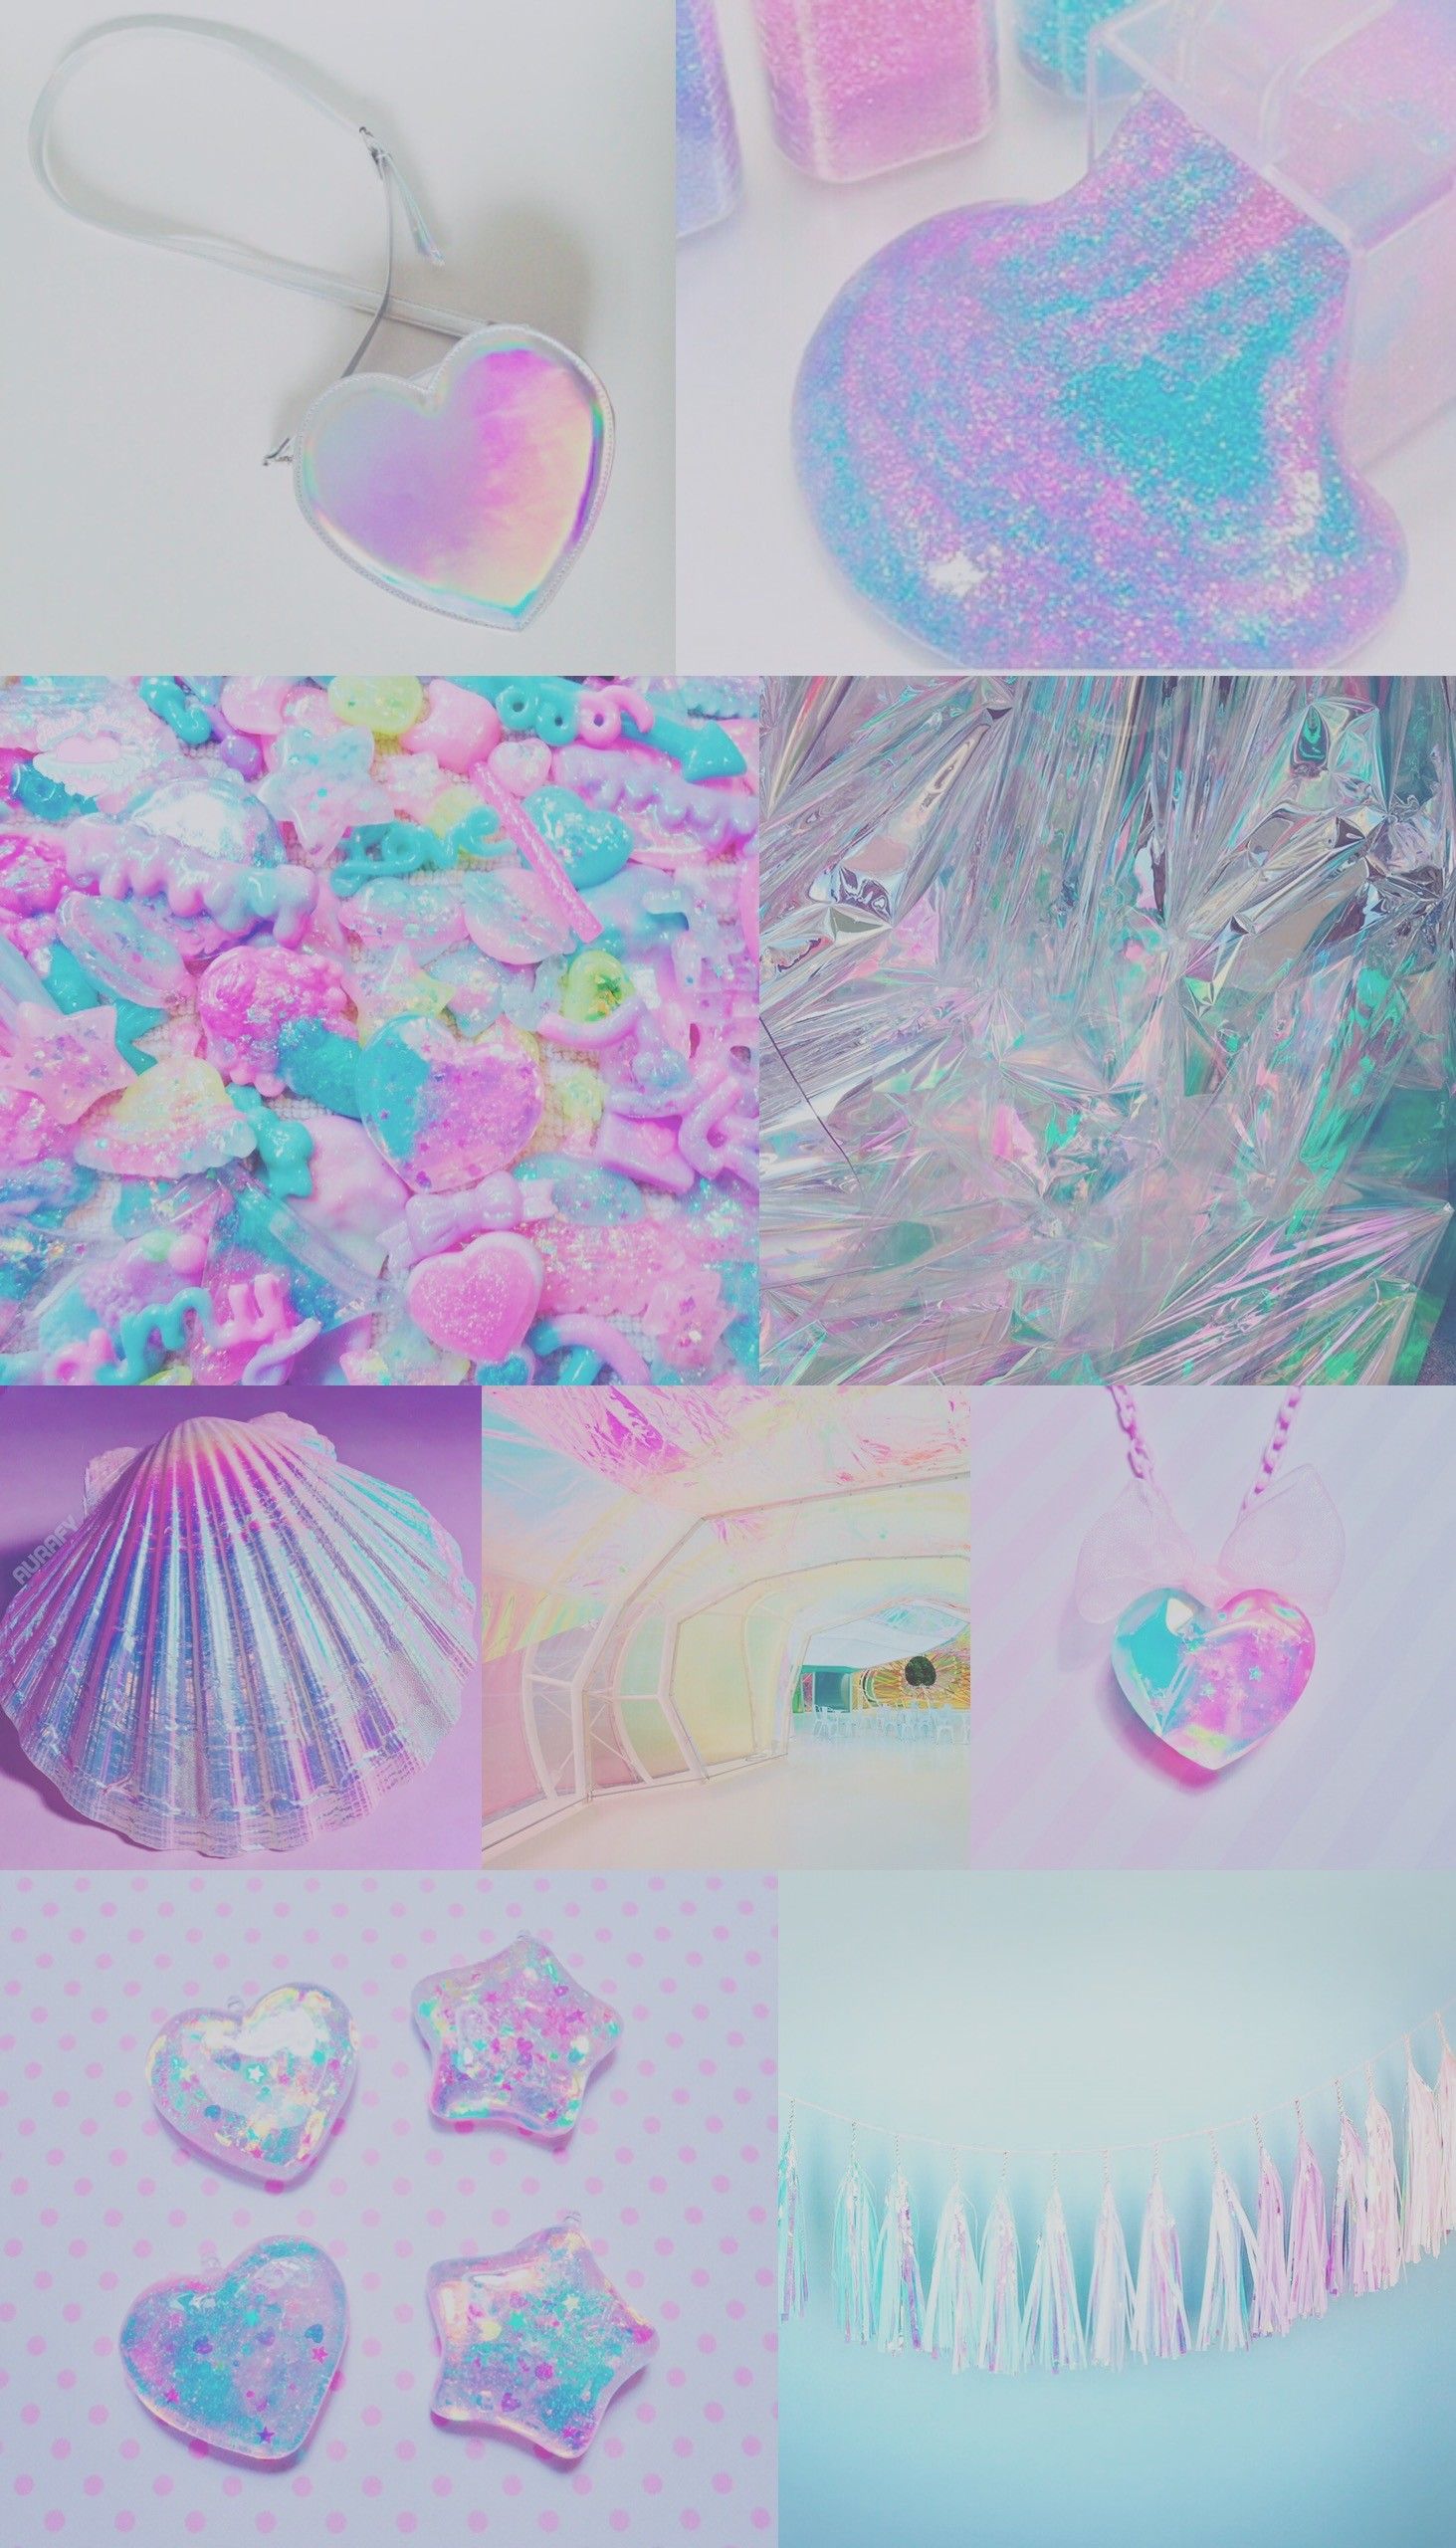 Aesthetic background of pastel pink, blue, and purple with a collage of holographic images - Pink collage, iridescent